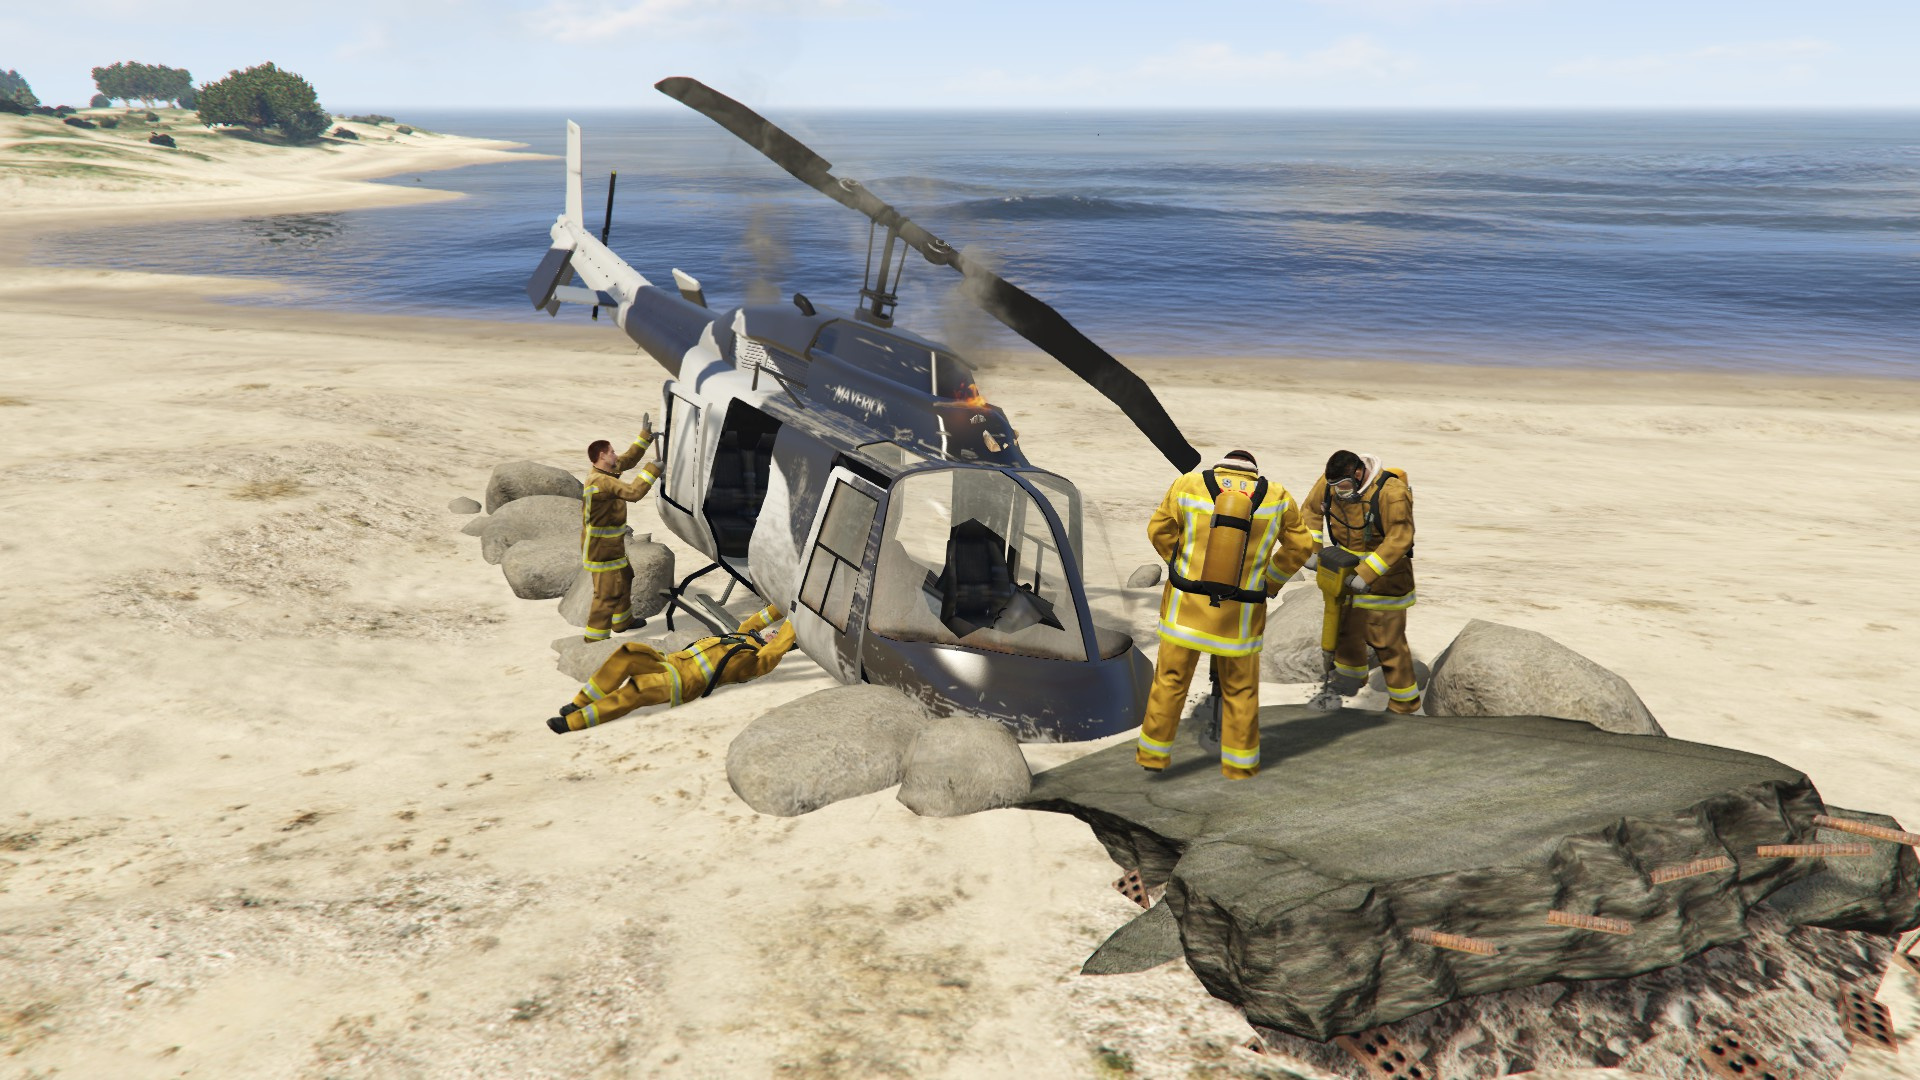 Helicopter Location in GTA 5 and GTA Online